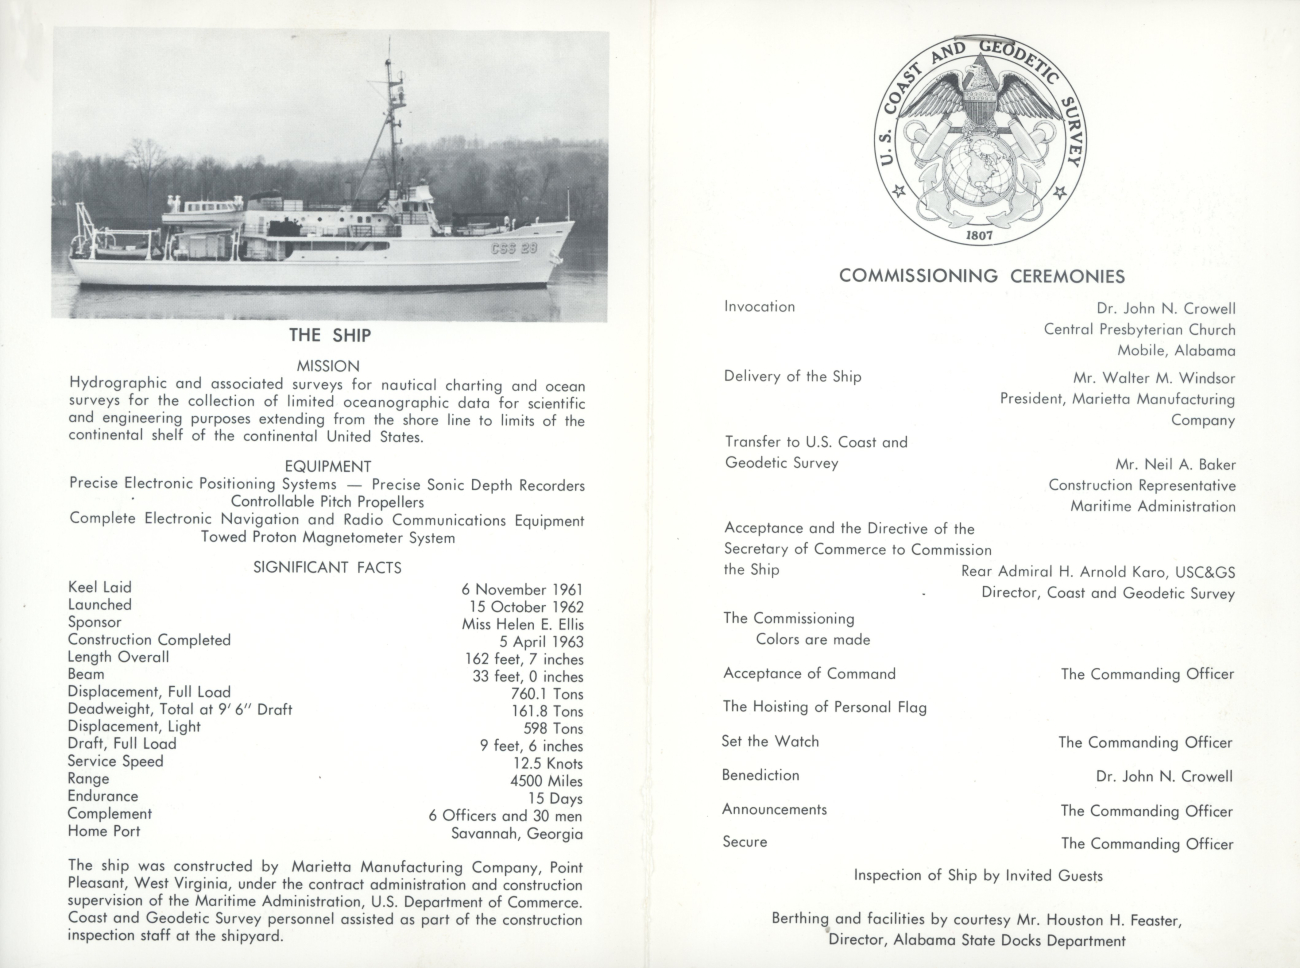 Invitation to commissioning ceremony of Coast and Geodetic Survey Ship PEIRCEon May 6, 1963